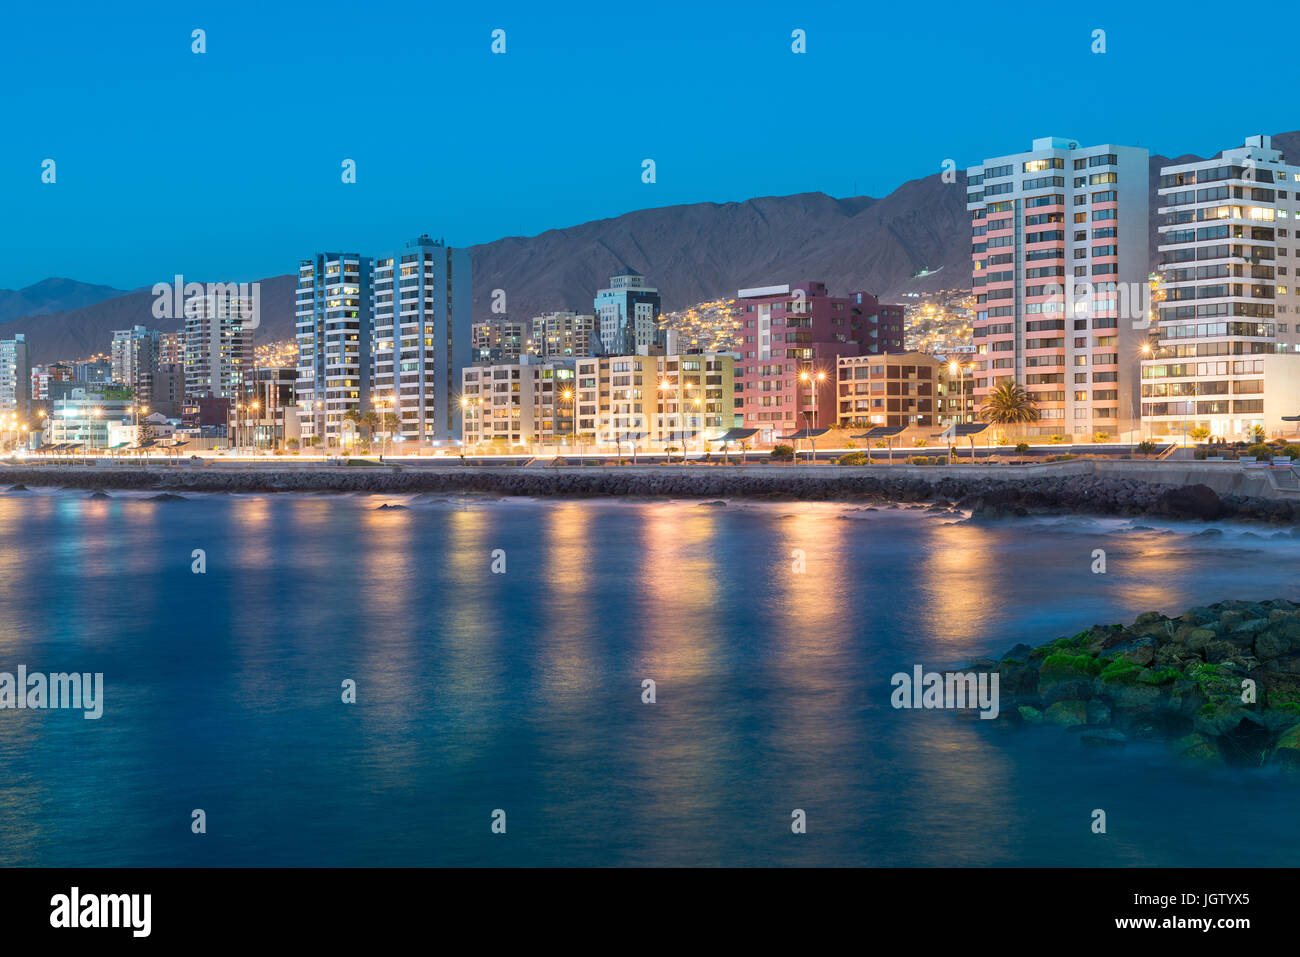 Panoramic view of the coastline of Antofagasta, know as the Pearl of the North and the biggest city in the Mining Region of northern Chile Stock Photo